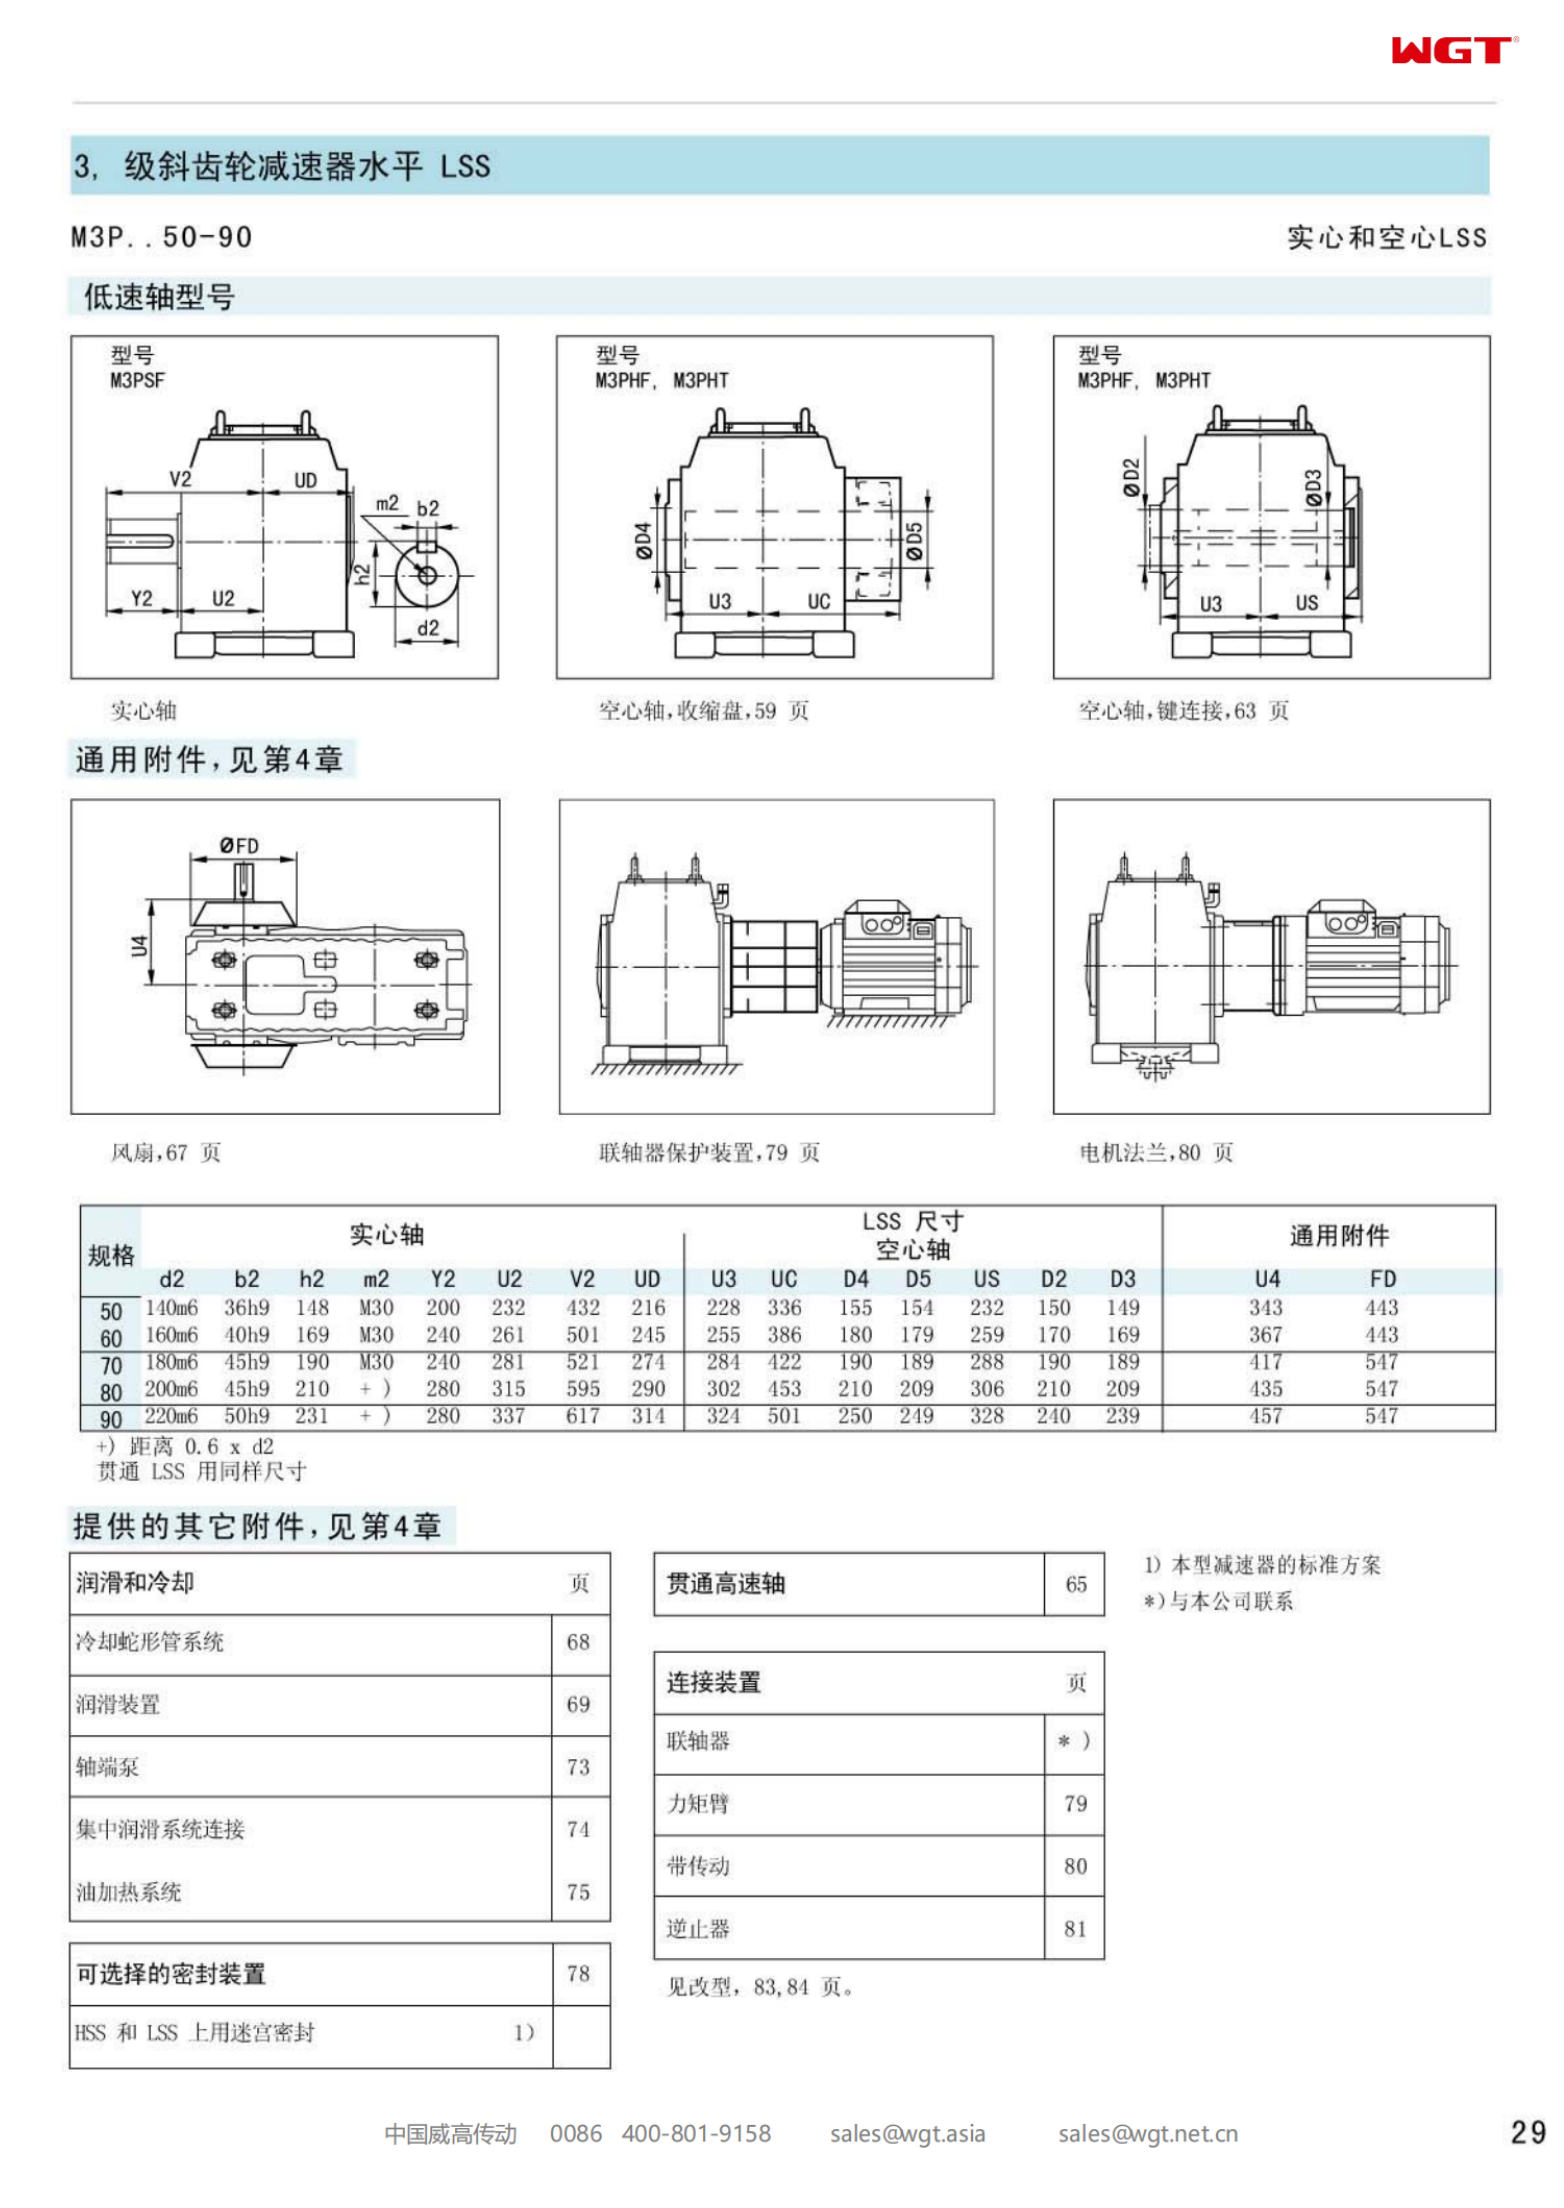 M3PSF90 Replace_SEW_M_Series Gearbox